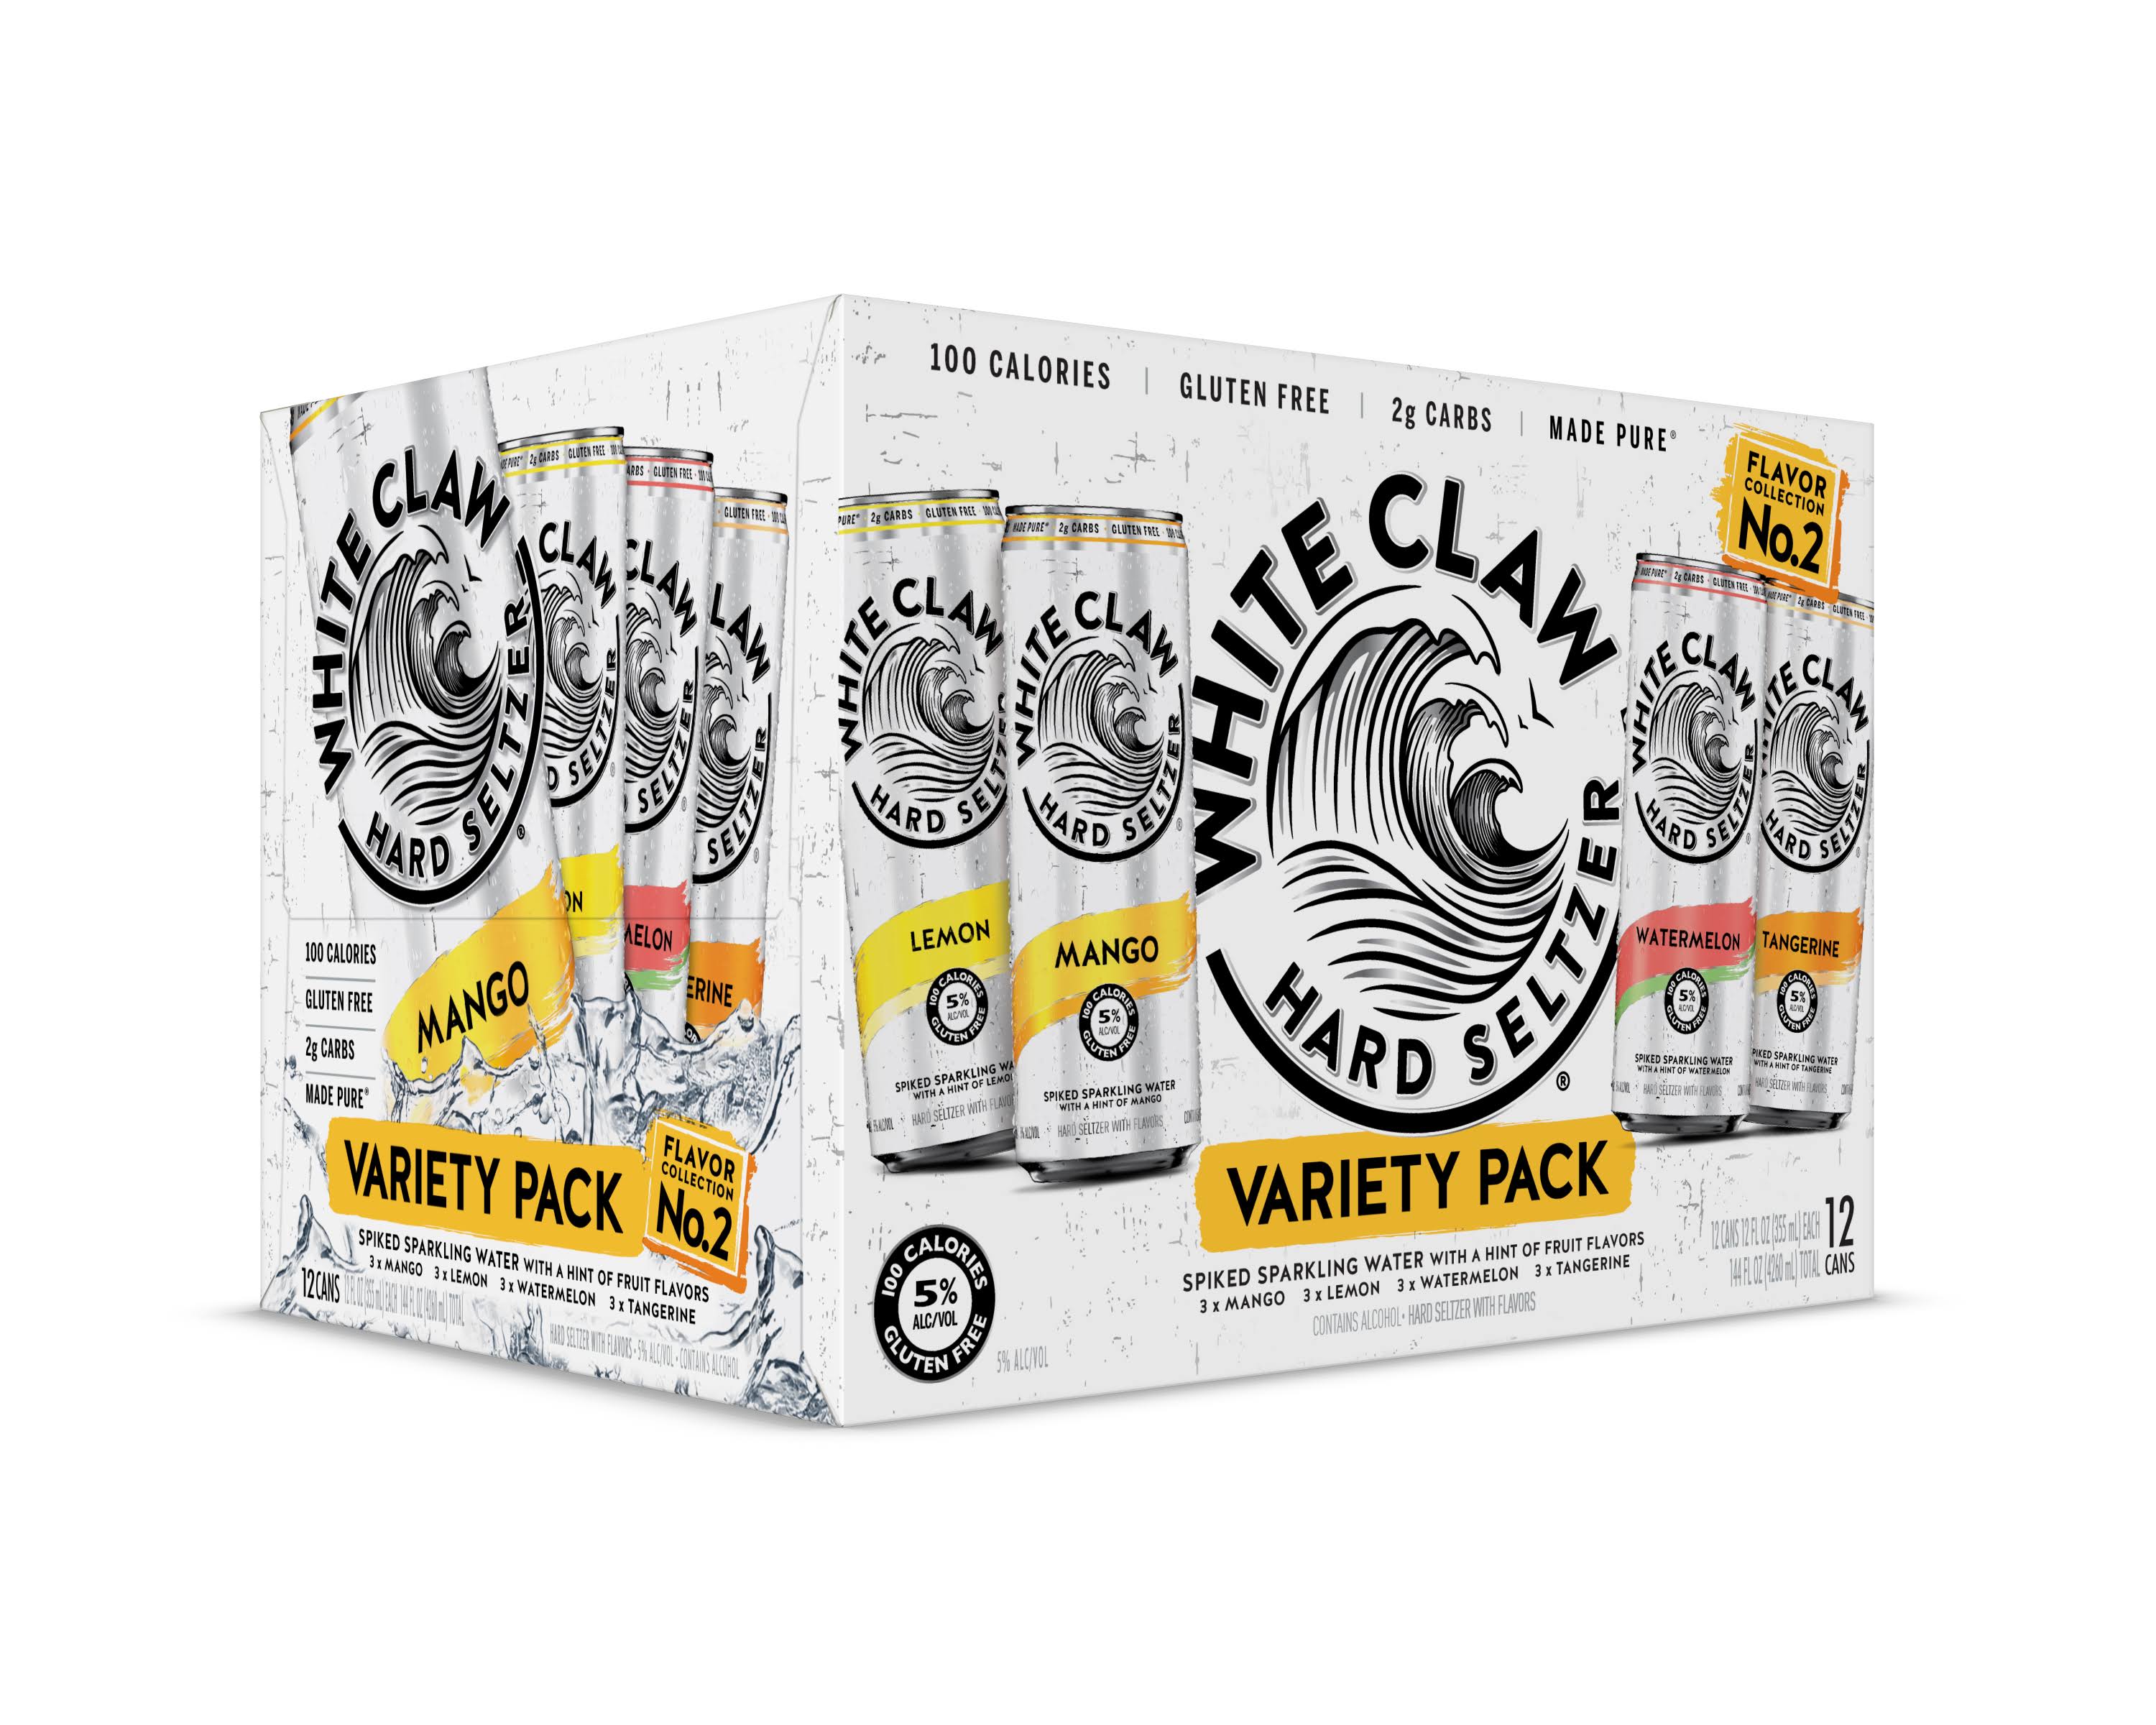 White Claw Hard Seltzer, Variety Pack - 12 pack, 12 fl oz cans